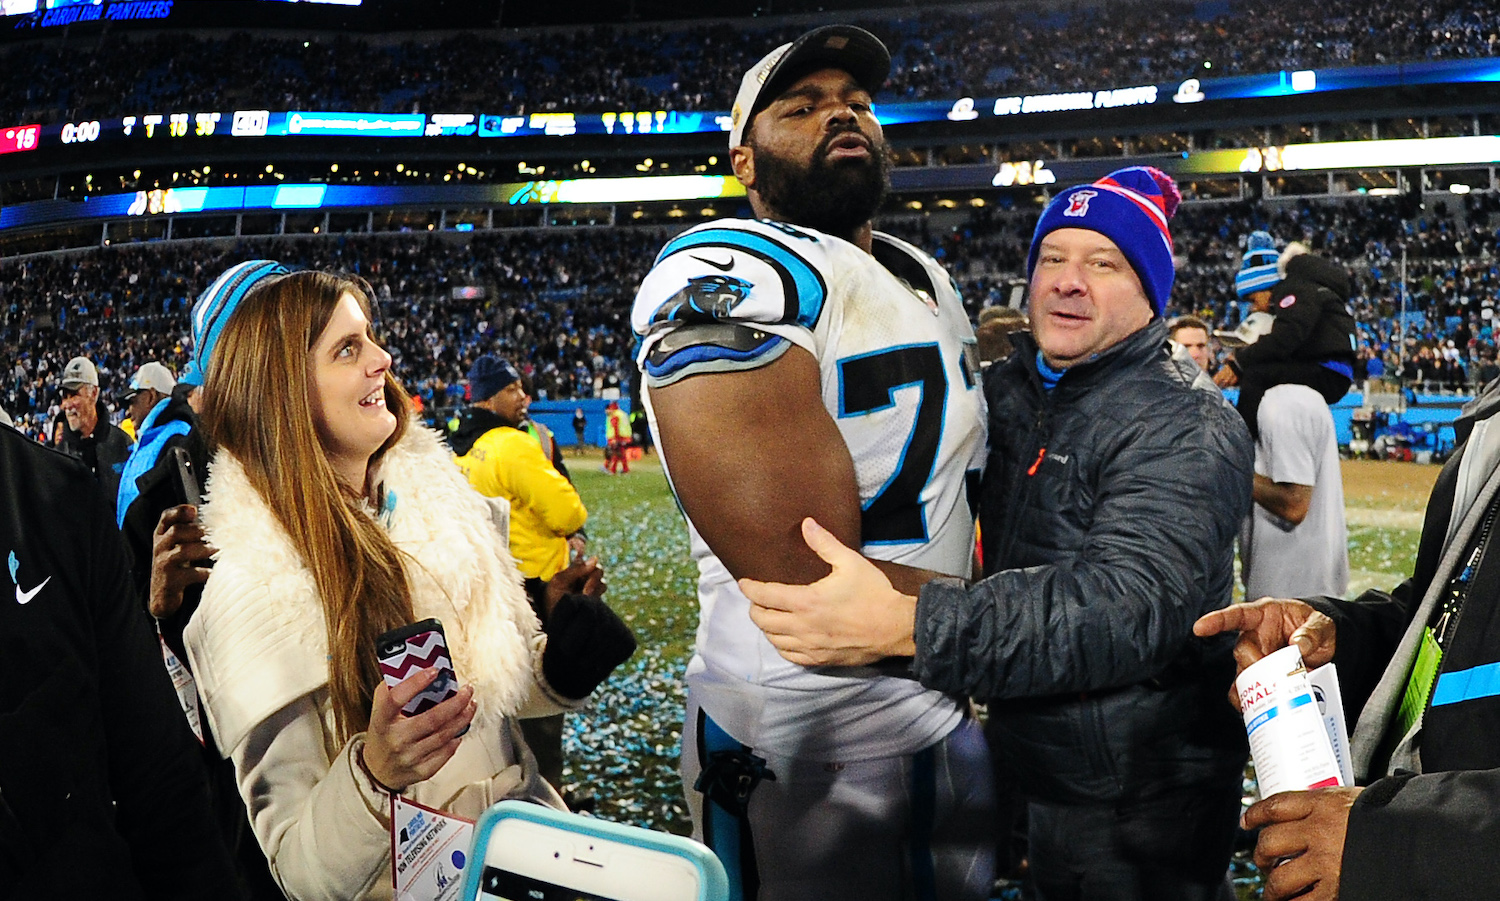 Michael Oher #73 of the Carolina Panthers celebrates with his family after the NFC Championship Game against the Arizona Cardinals at Bank Of America Stadium on January 24, 2016 in Charlotte, North Carolina.